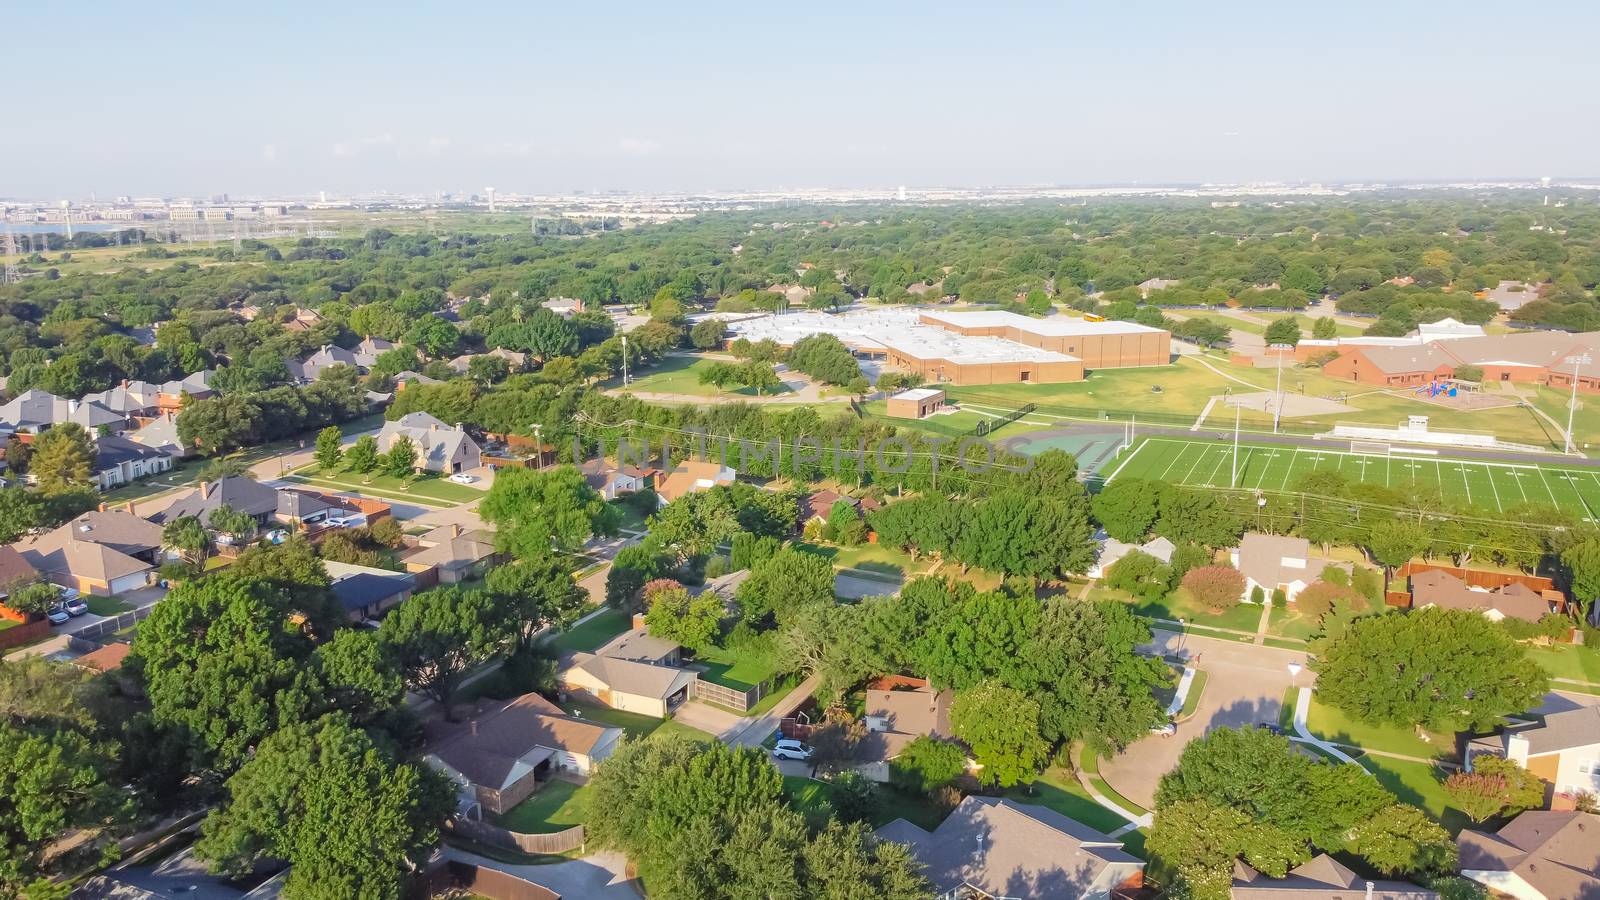 Residential neighborhood in school district with football field in background near Dallas, Texas, America. Suburban houses with large fenced backyard and large tree in early summer morning light